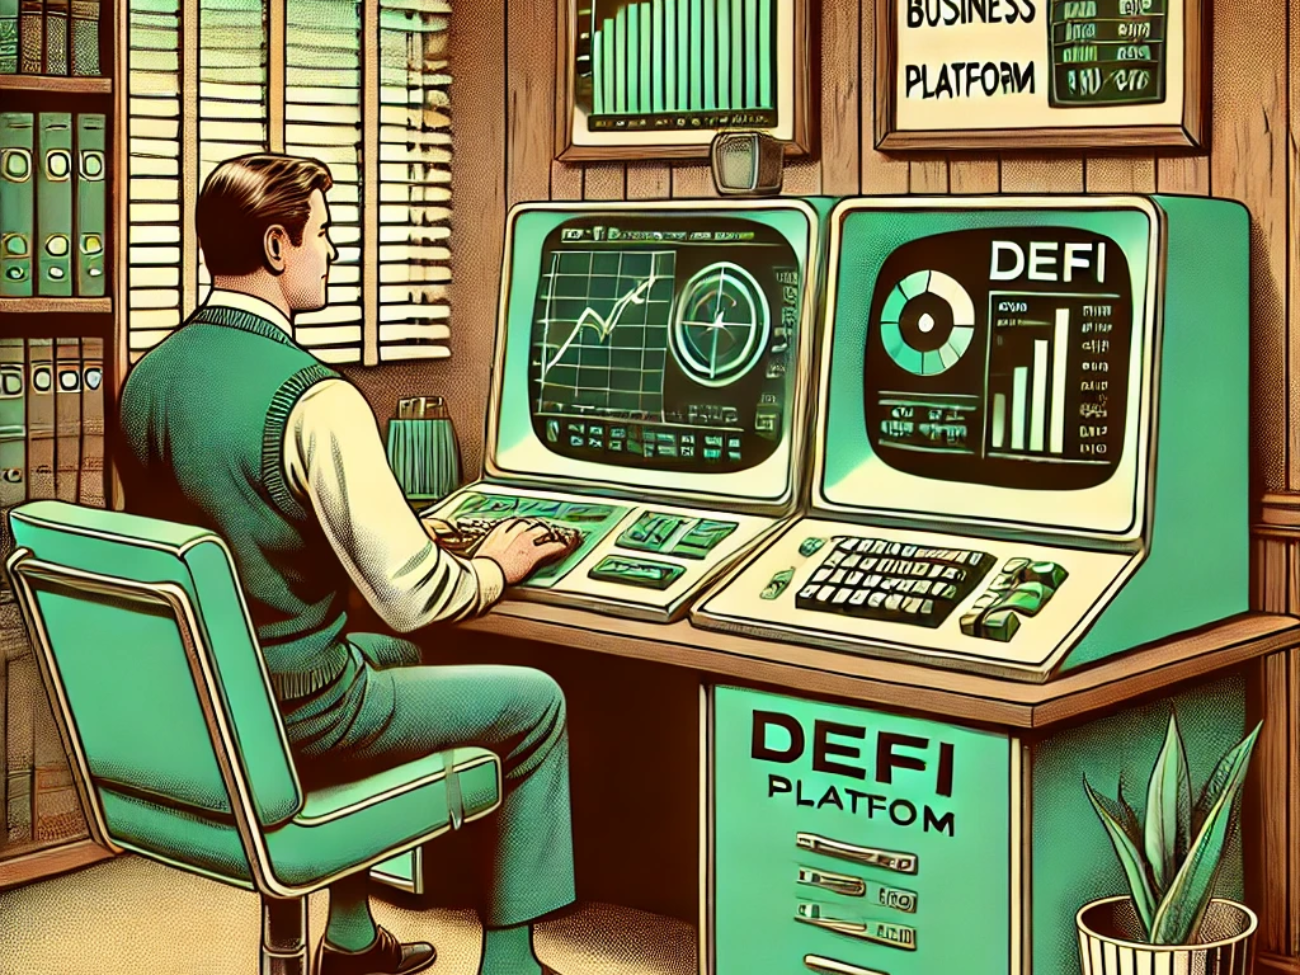 DALL·E 2024-06-25 09.23.53 - 1960s style illustration showing a small business owner using a futuristic DeFi platform on a vintage computer. The scene captures a cozy office setti